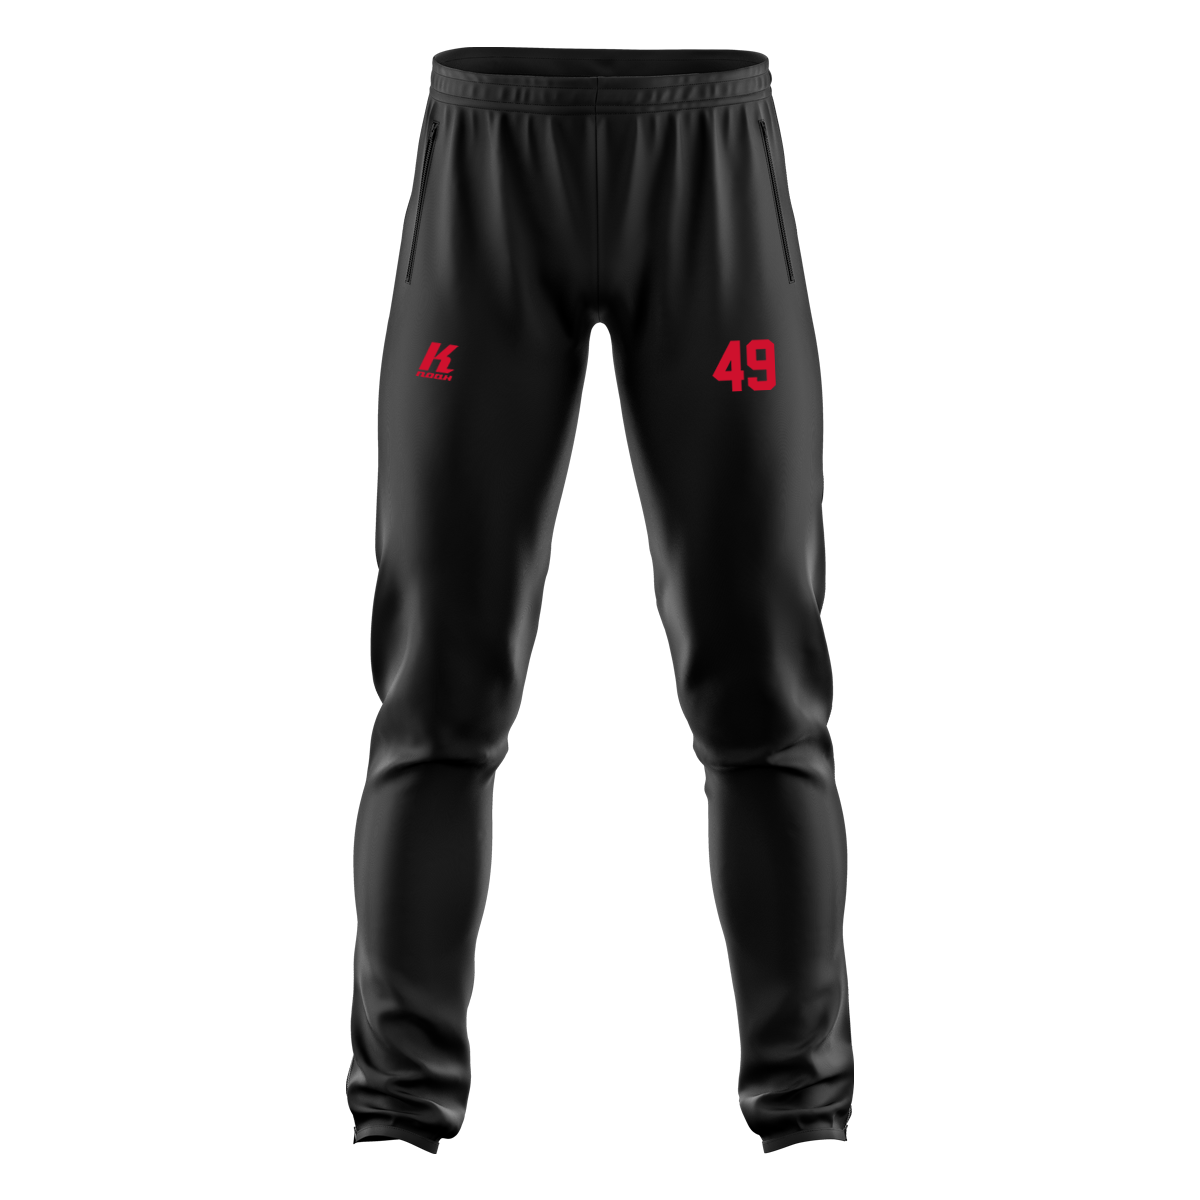 HCK Leisure Pant with Playernumber/Initials